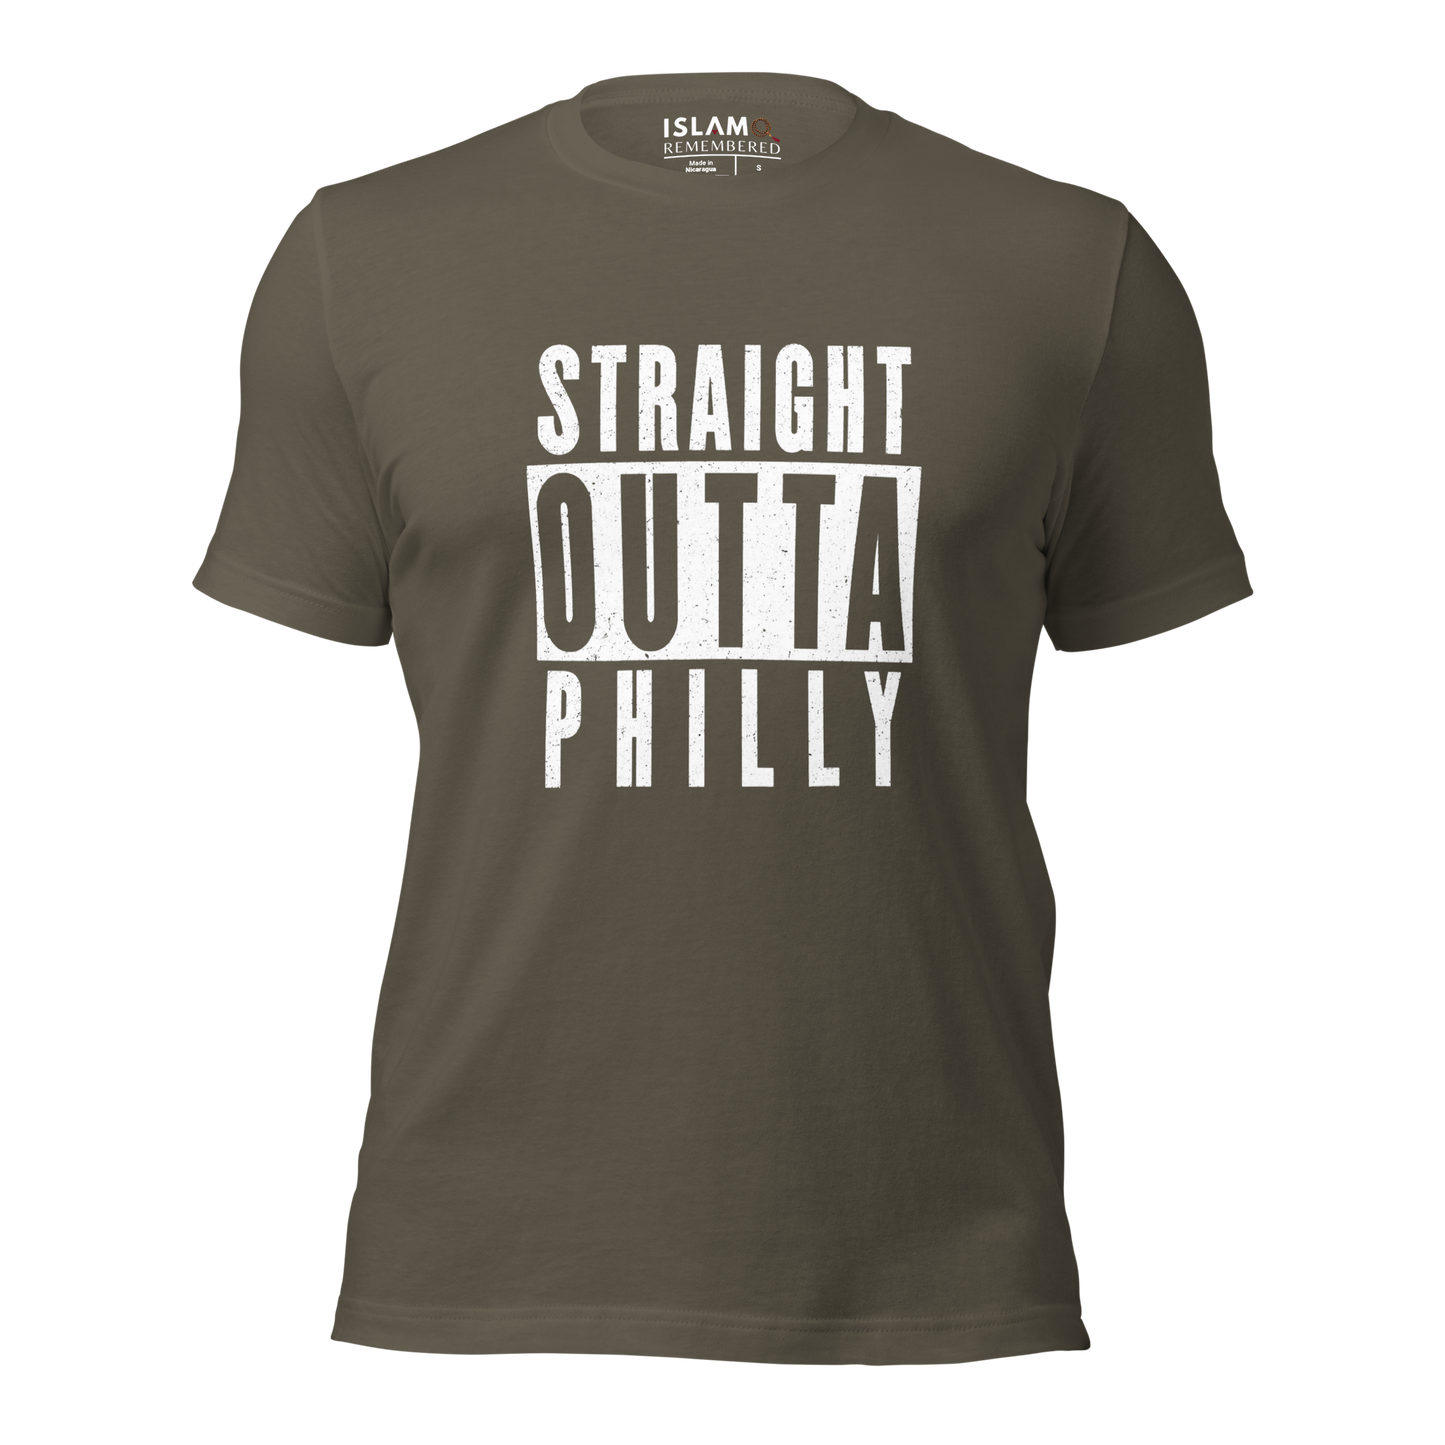 ADULT T-Shirt - STRAIGHT OUTTA PHILLY